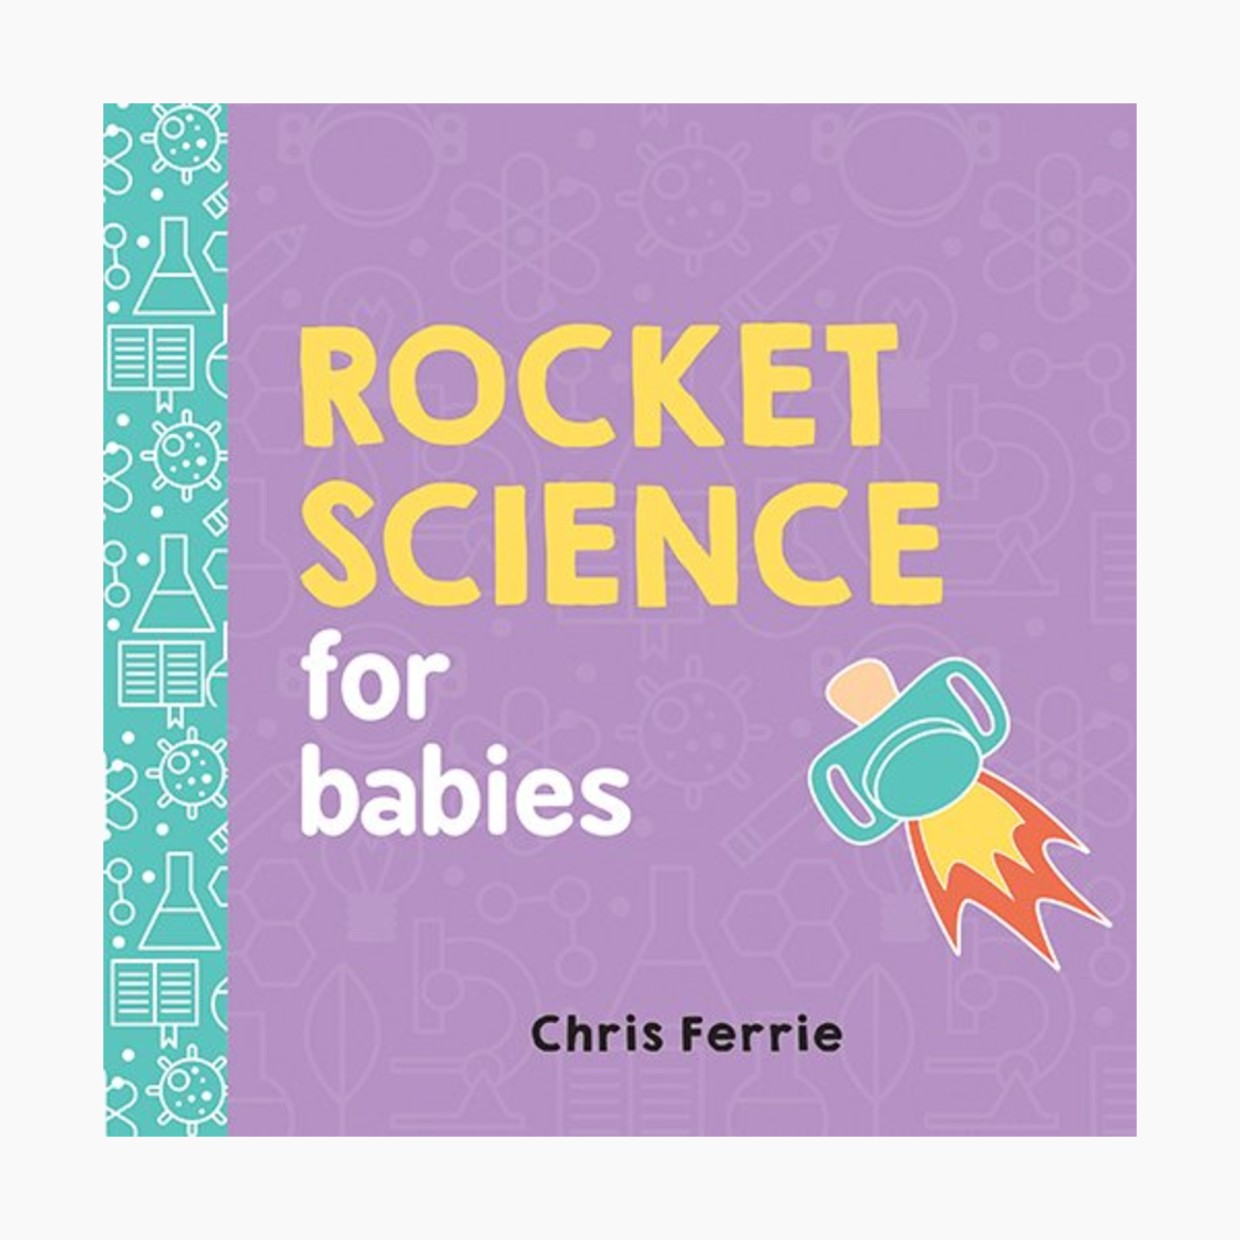 Rocket Science for Babies.